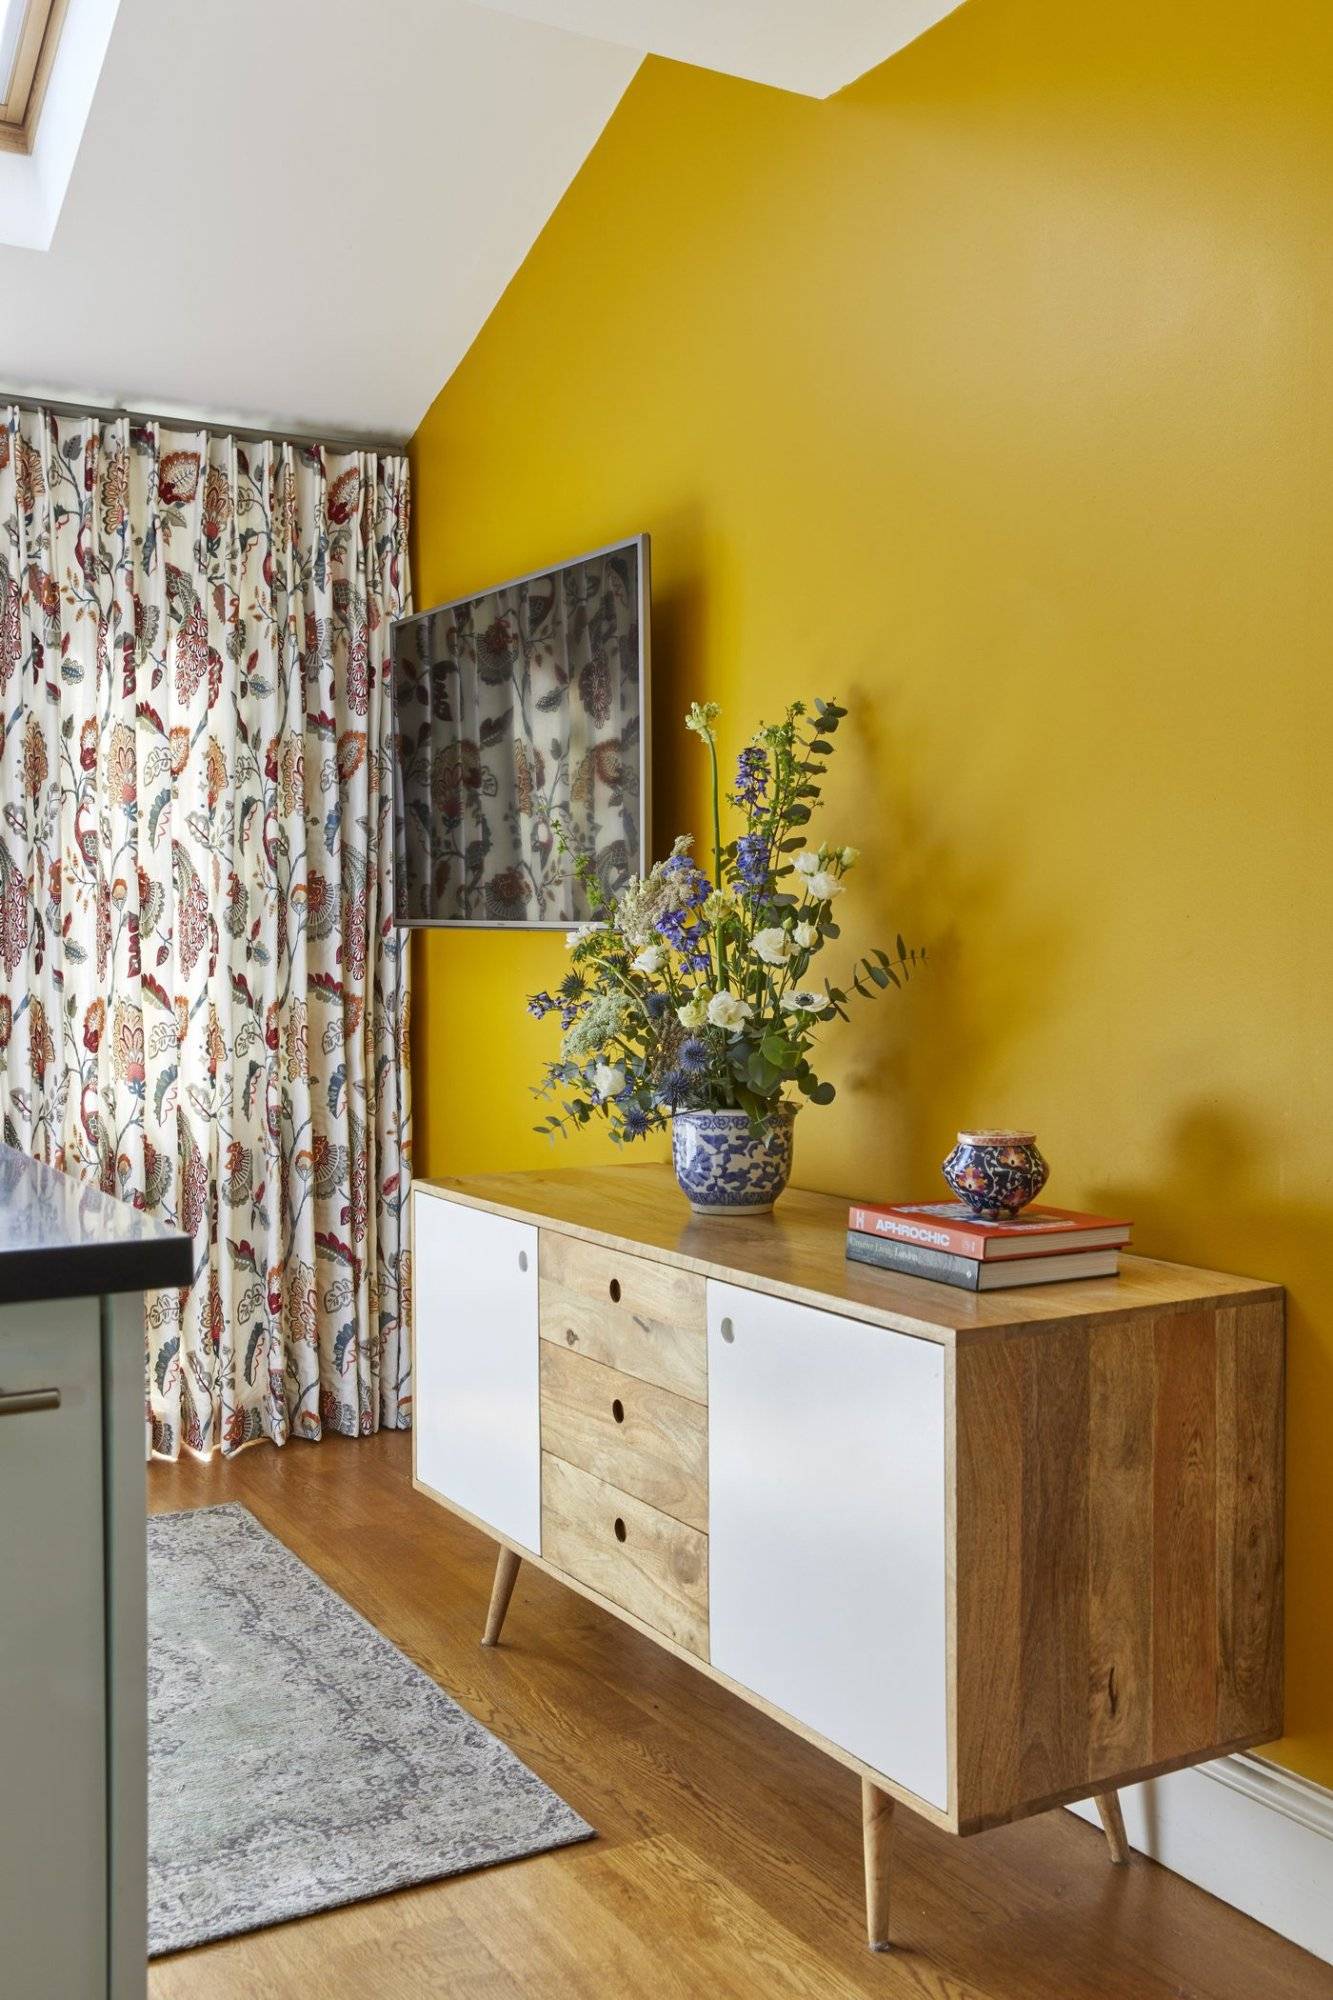 A kitchen with yellow walls and a wooden cabinet.